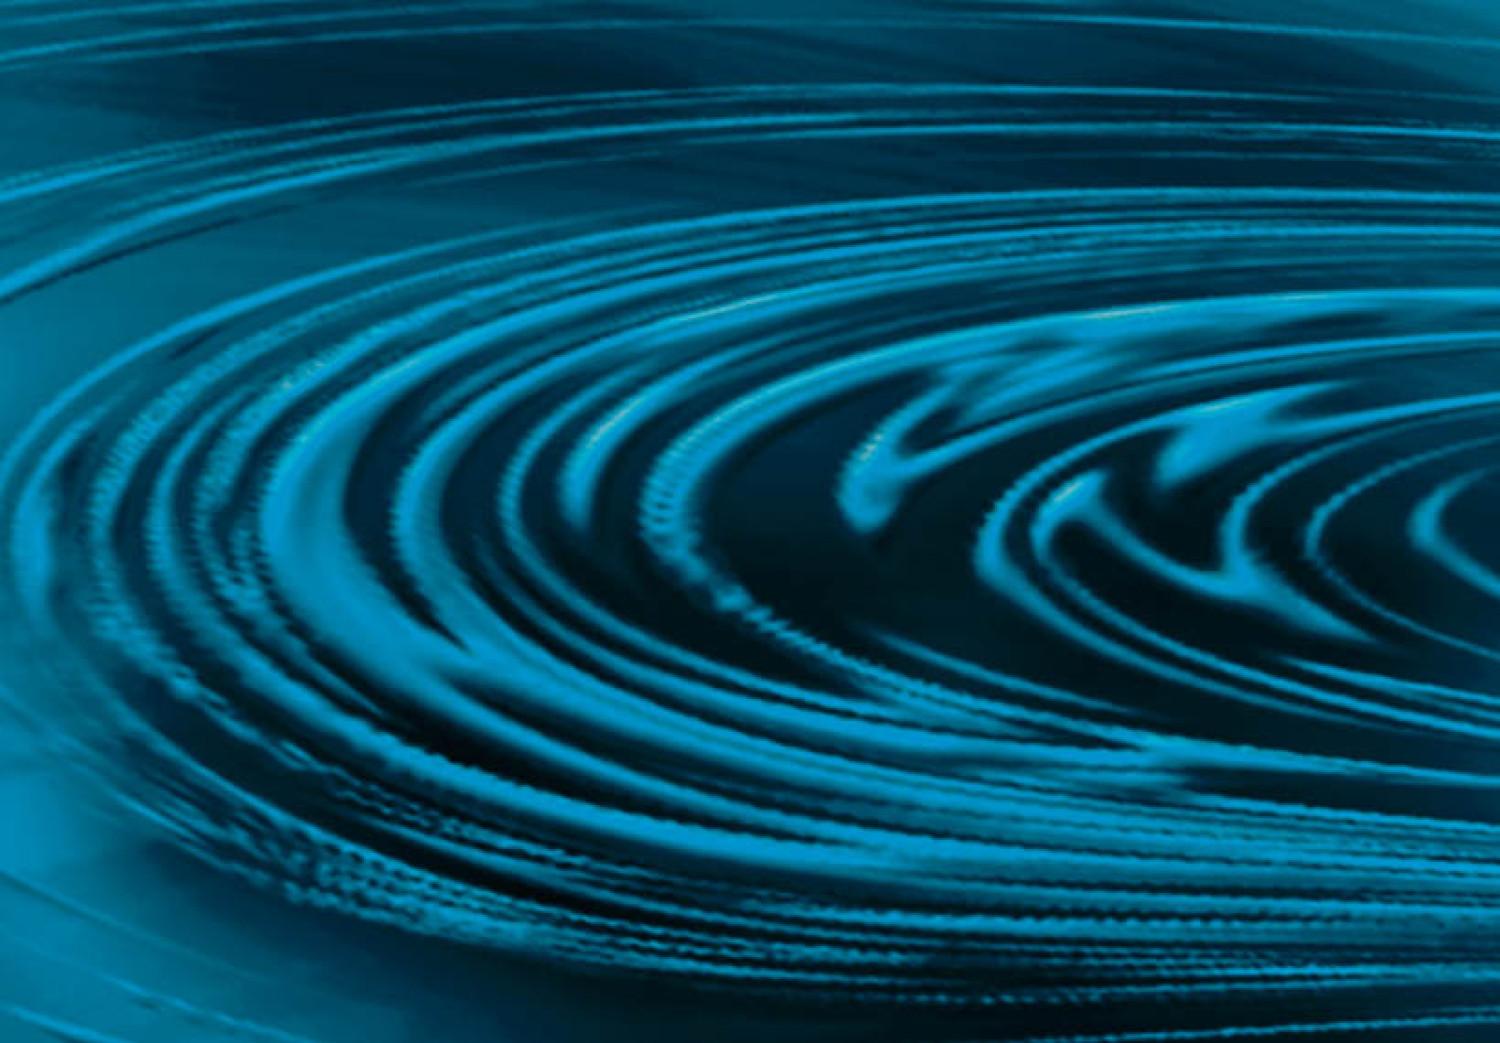 Canvas Blue vortex - abstract, fancy with blue and black graphics